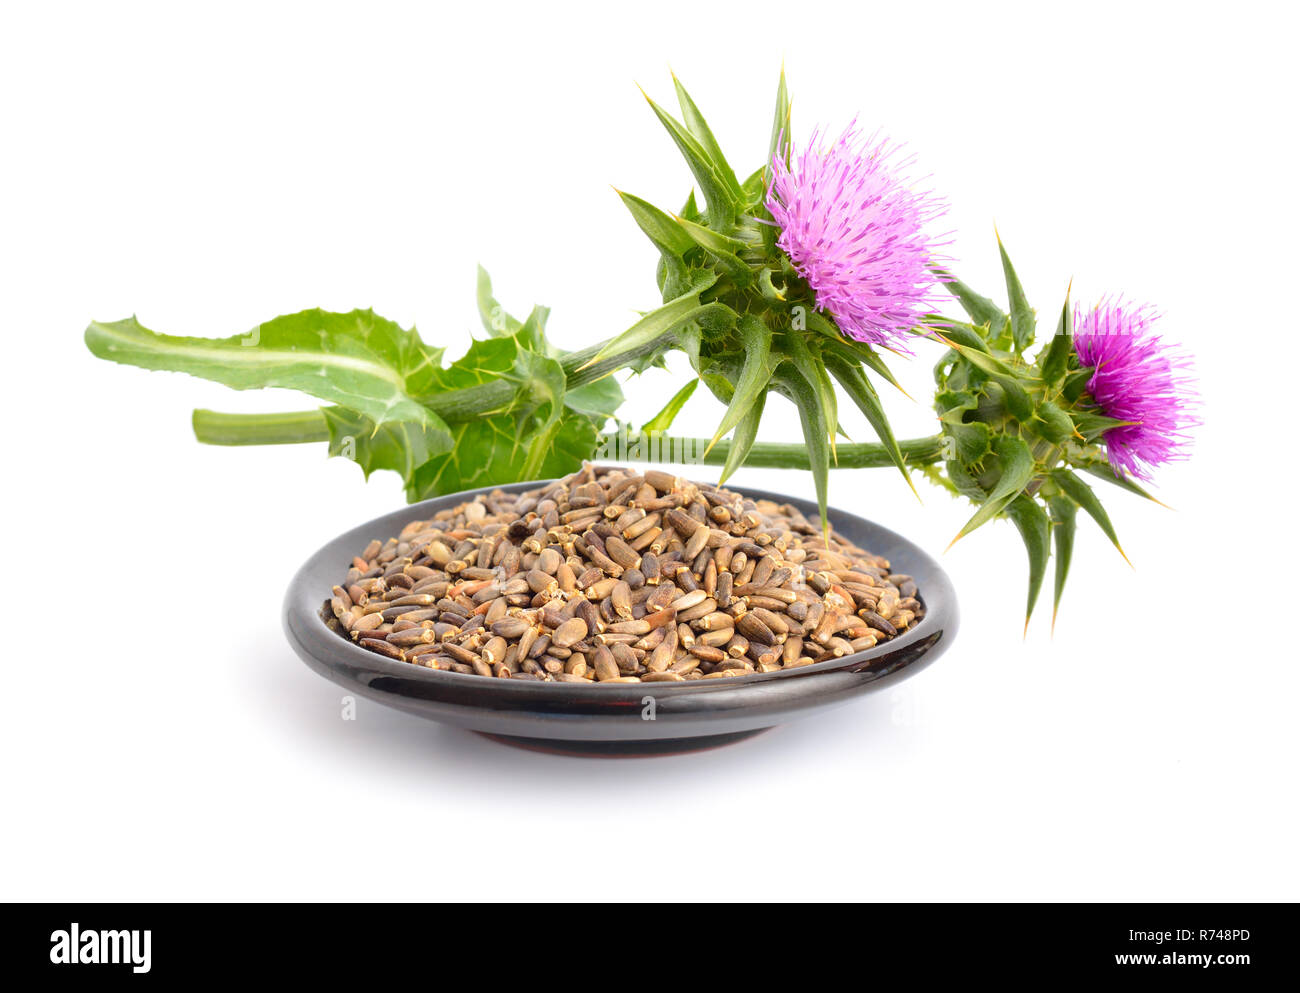 Milk thistle flowers with seeds. Isolated. Stock Photo